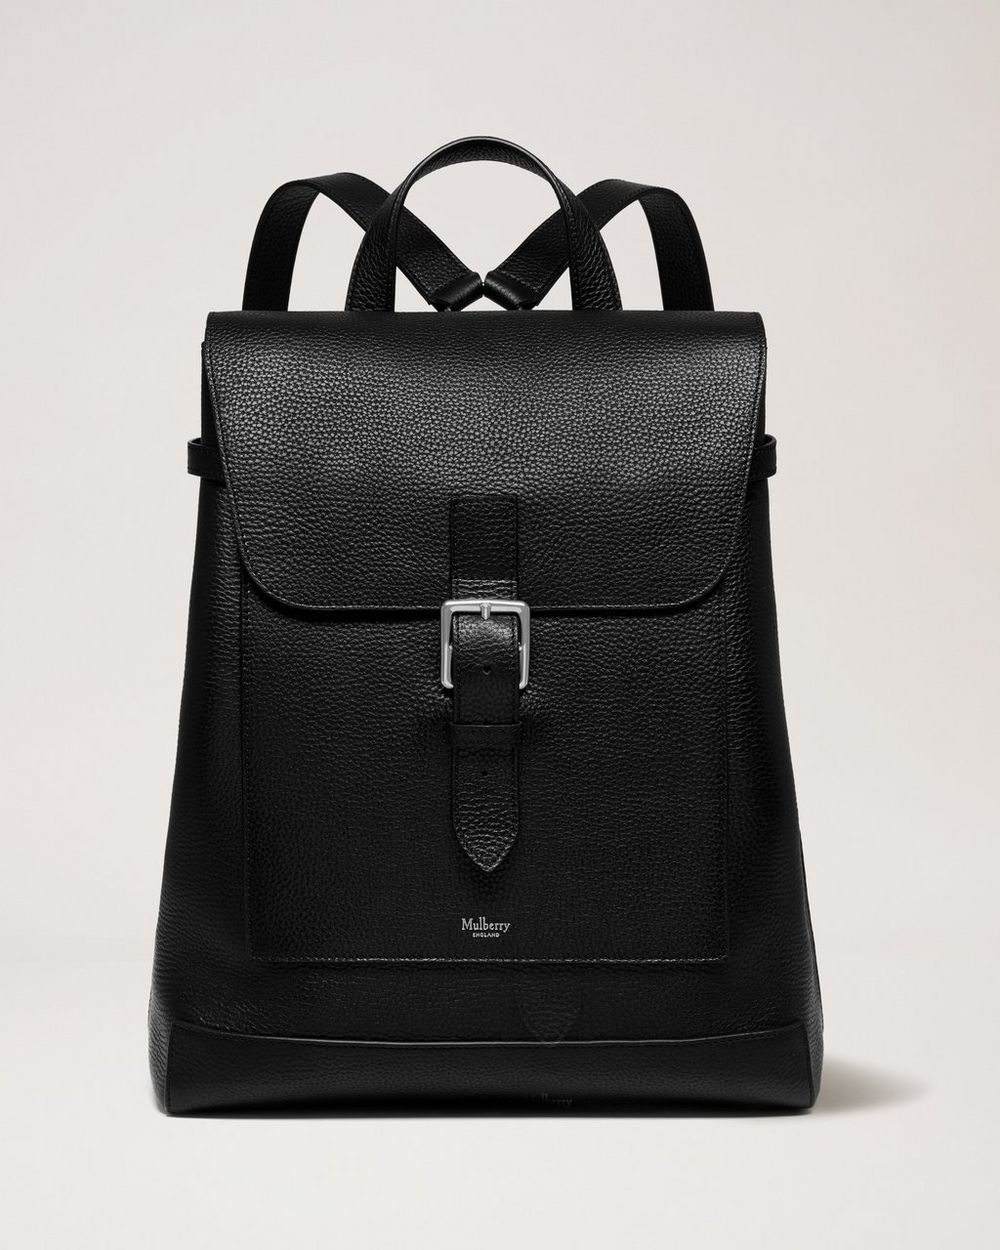 Mulberry Bayswater Small Classic Grain Leather Backpack, Black